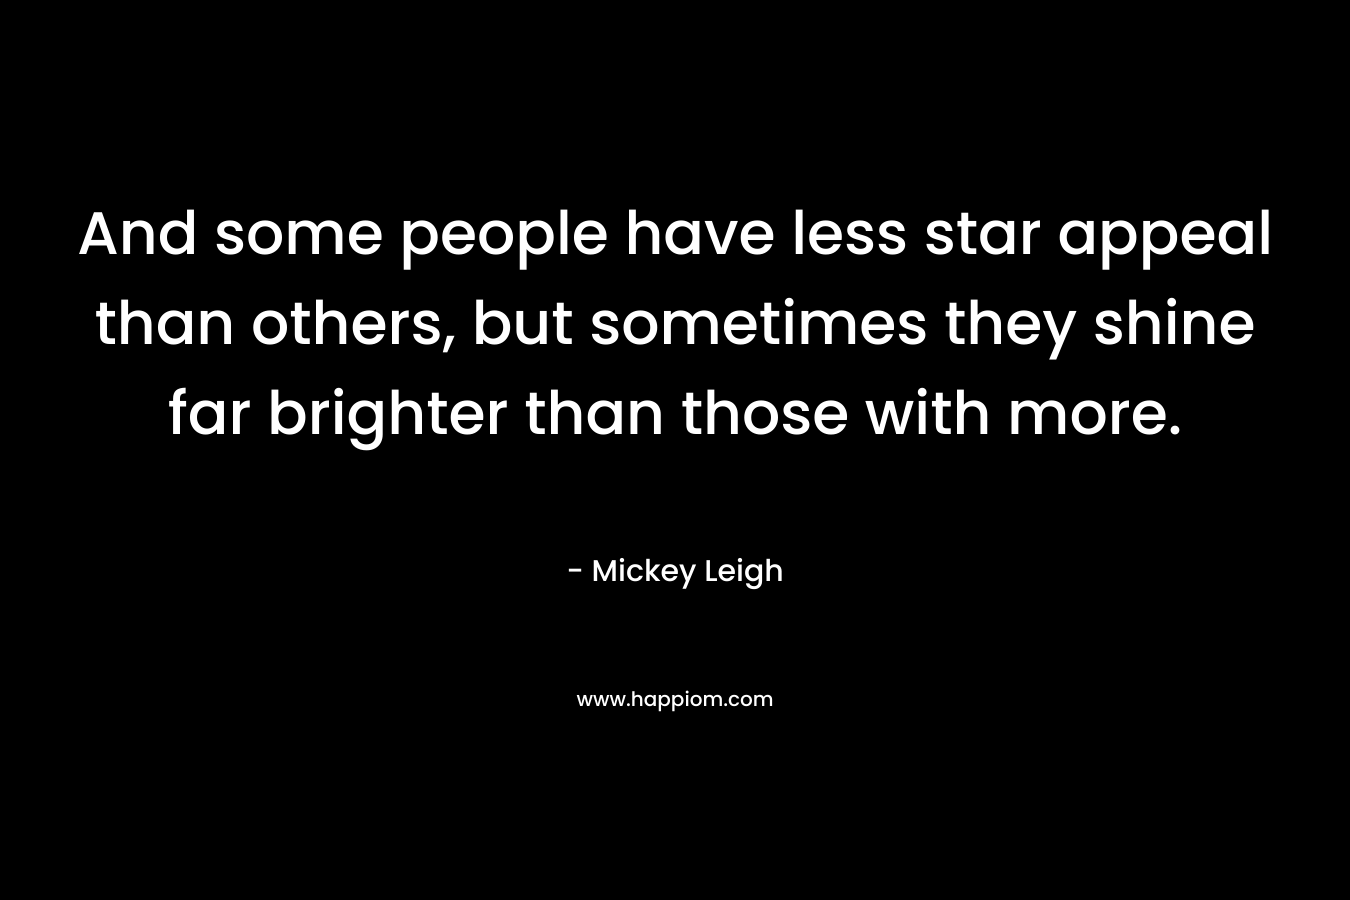 And some people have less star appeal than others, but sometimes they shine far brighter than those with more. – Mickey Leigh